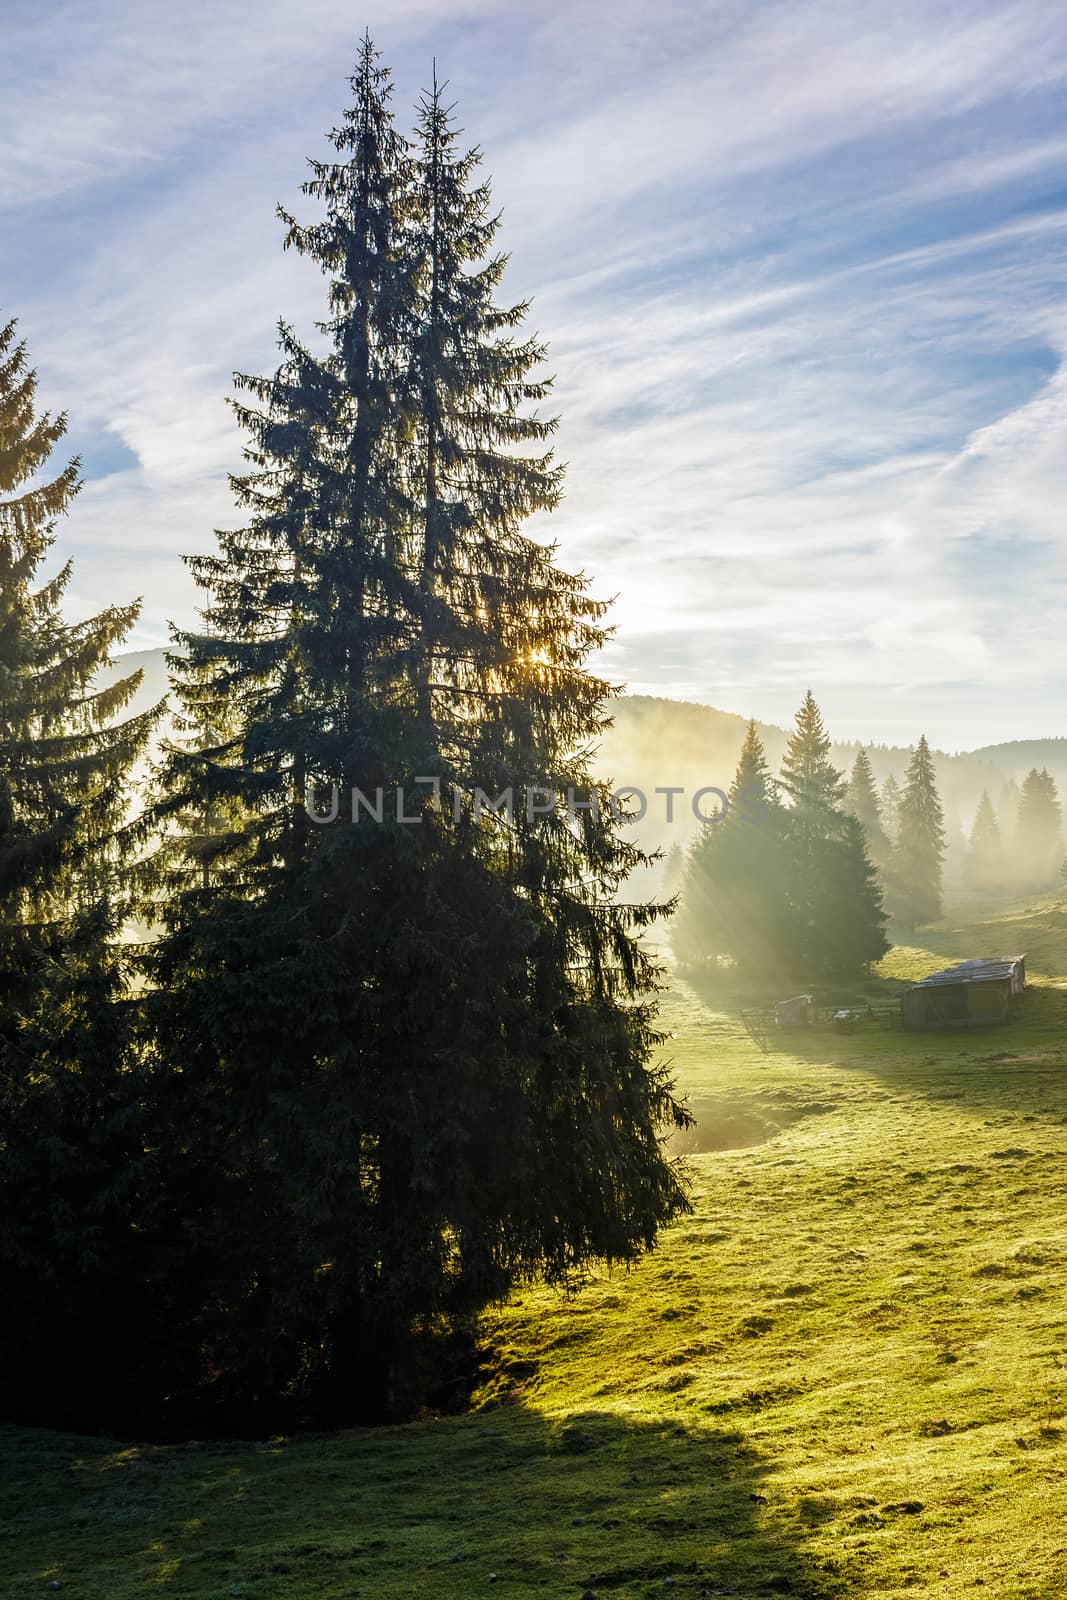 evergreen tree on a mountain slope by Pellinni